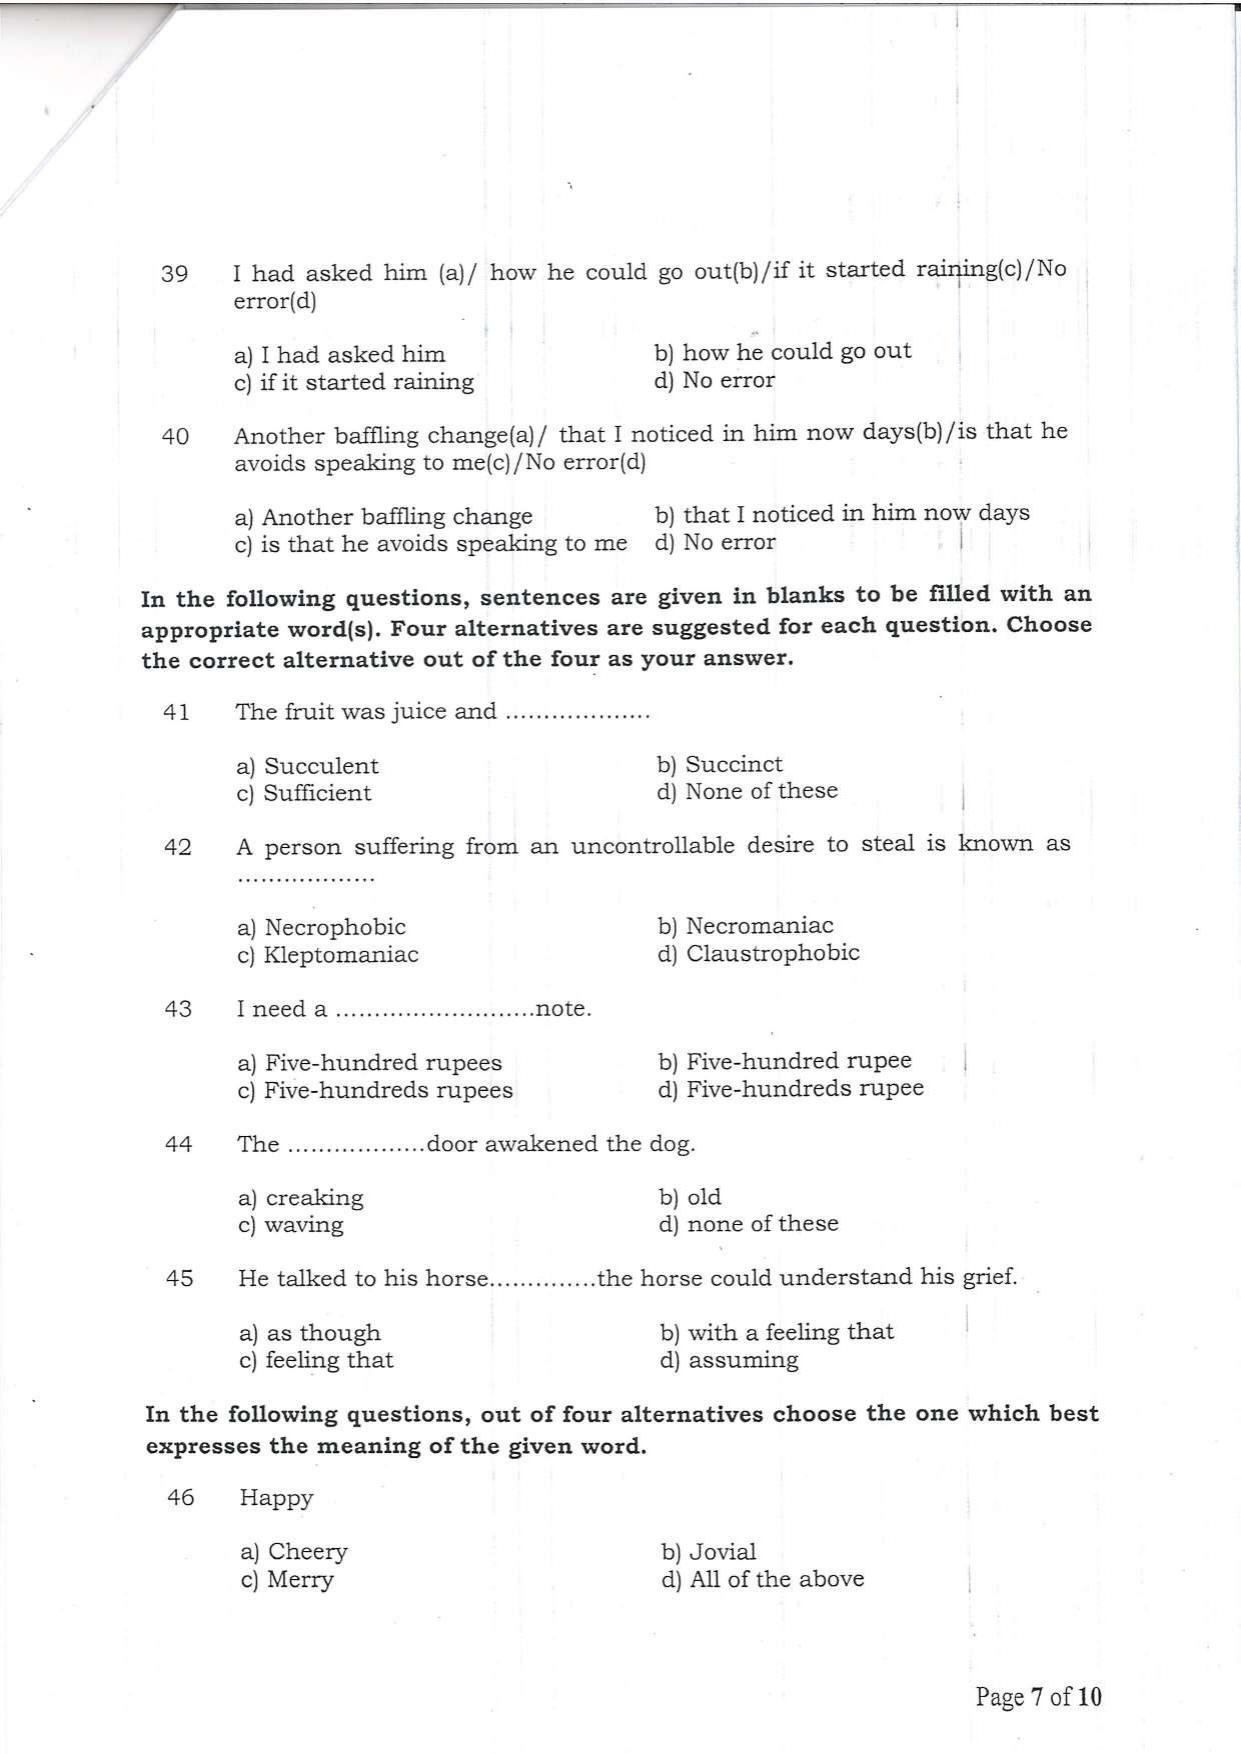 Question Paper of Office Assistant Grade III at BITM, Kolkata and NBSC, Siliguri (Advertisement No. 1/2022) - Page 7